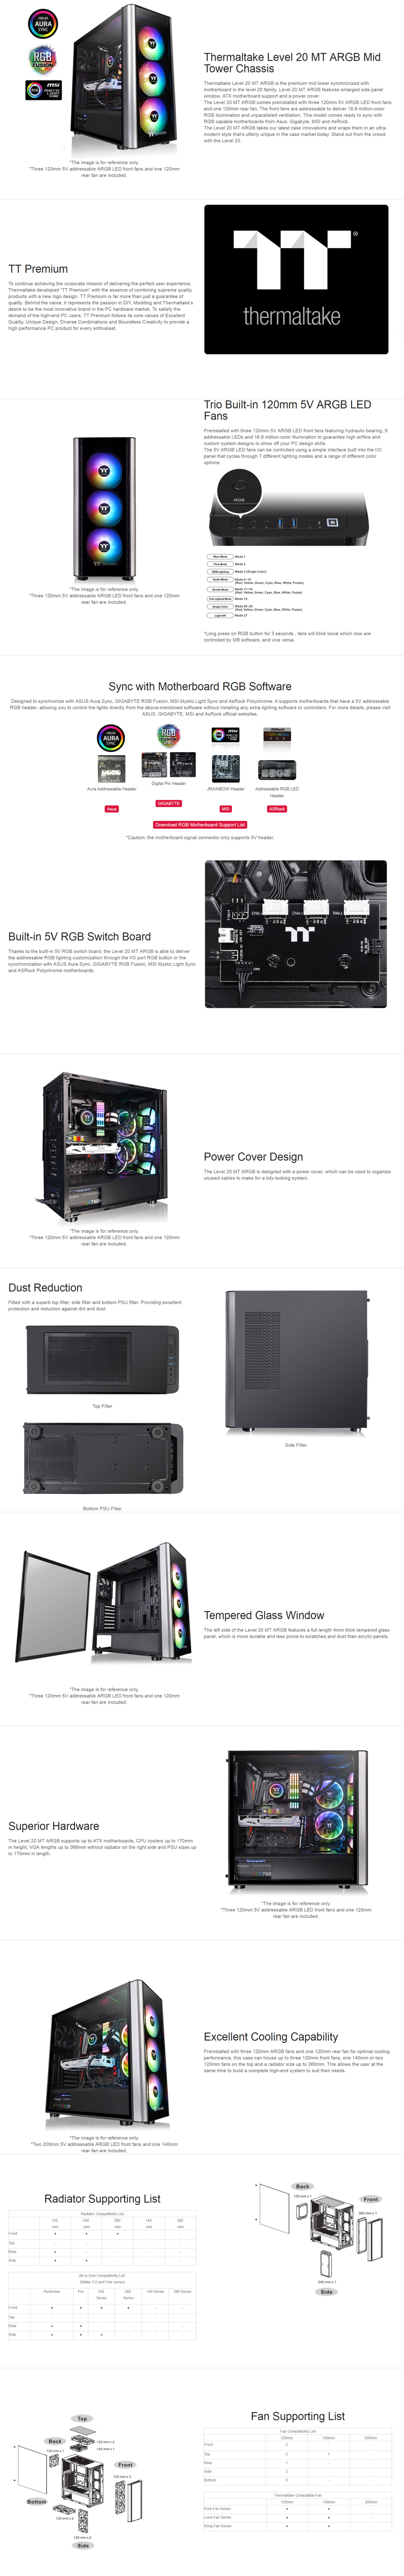 thermaltake-level-20-mt-argb-mid-tower-chassis.jpg